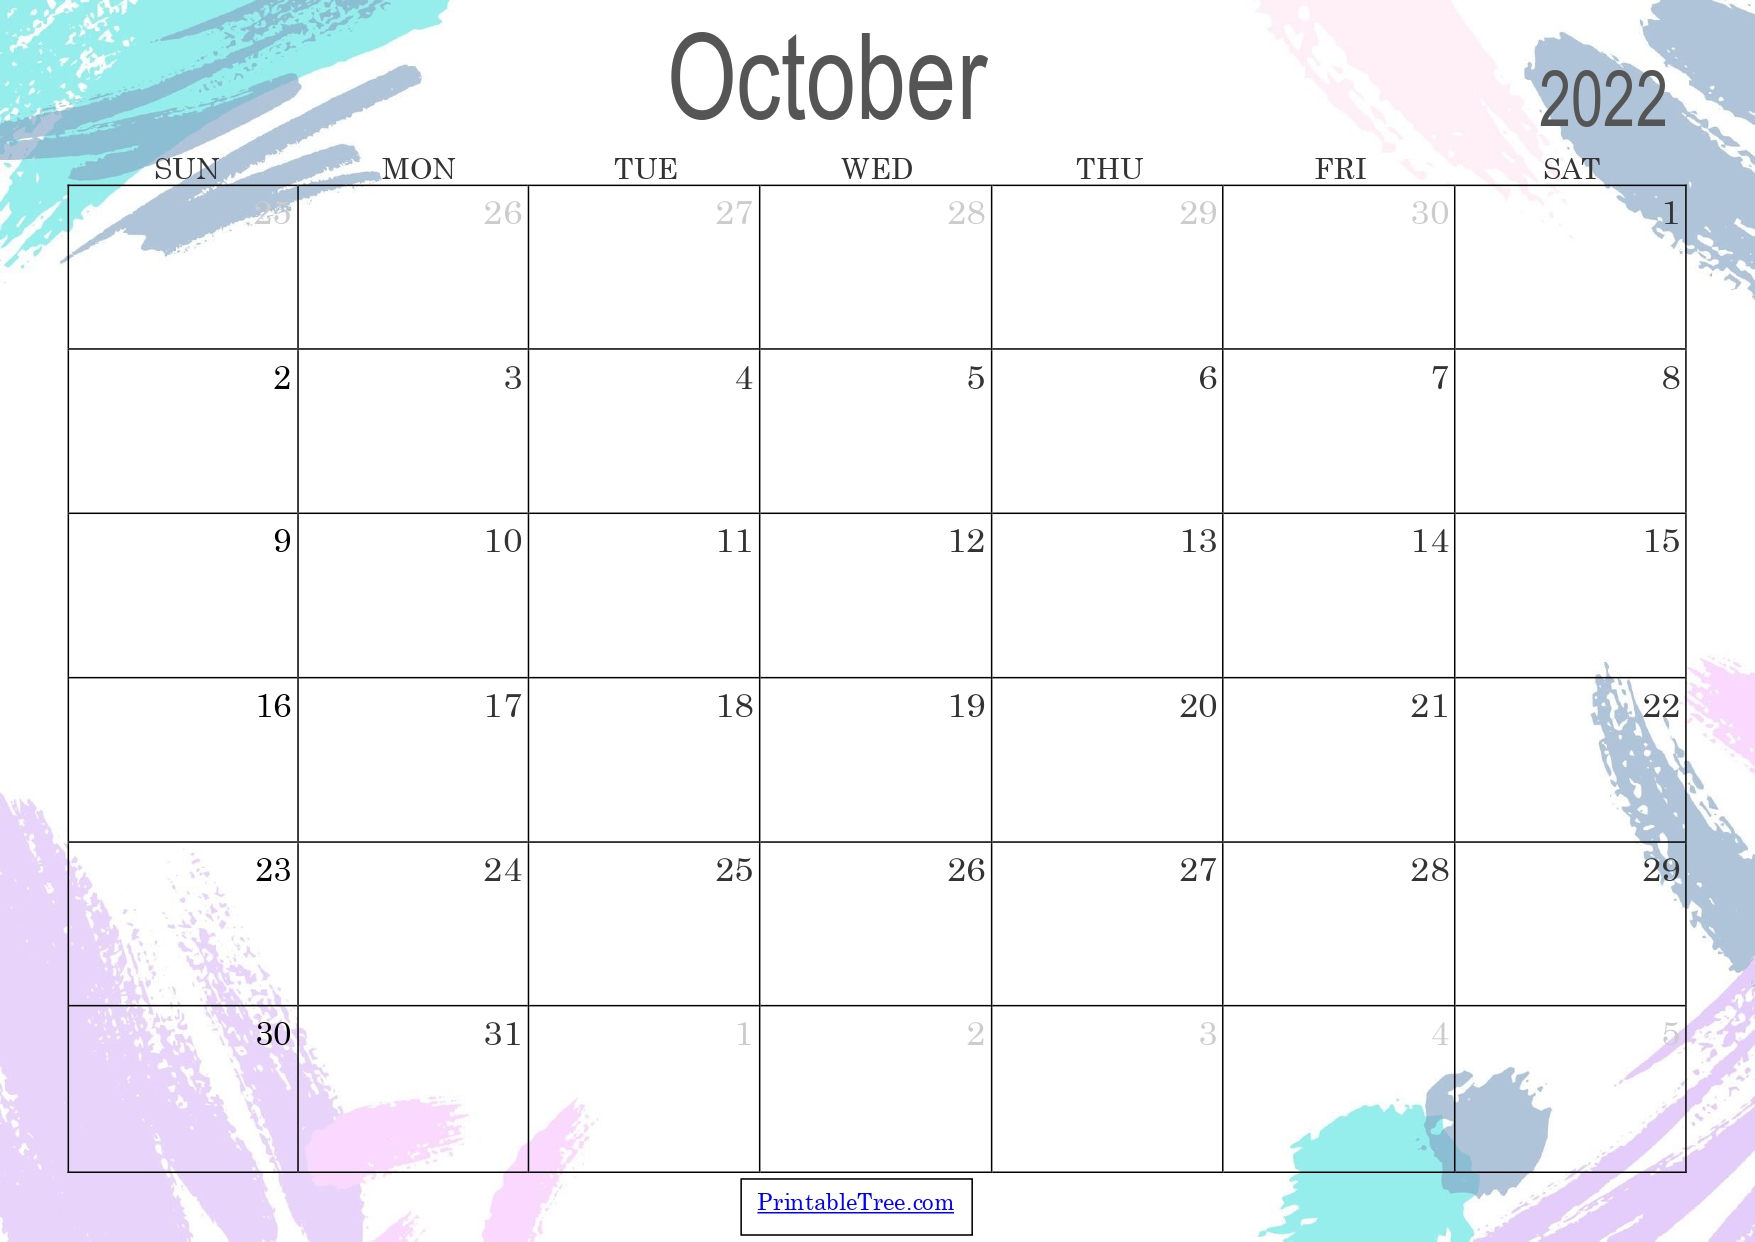 Free Printable Monthly Calendar October 2022 October 2022 Calendar Printable Pdf Free Templates With Holidays